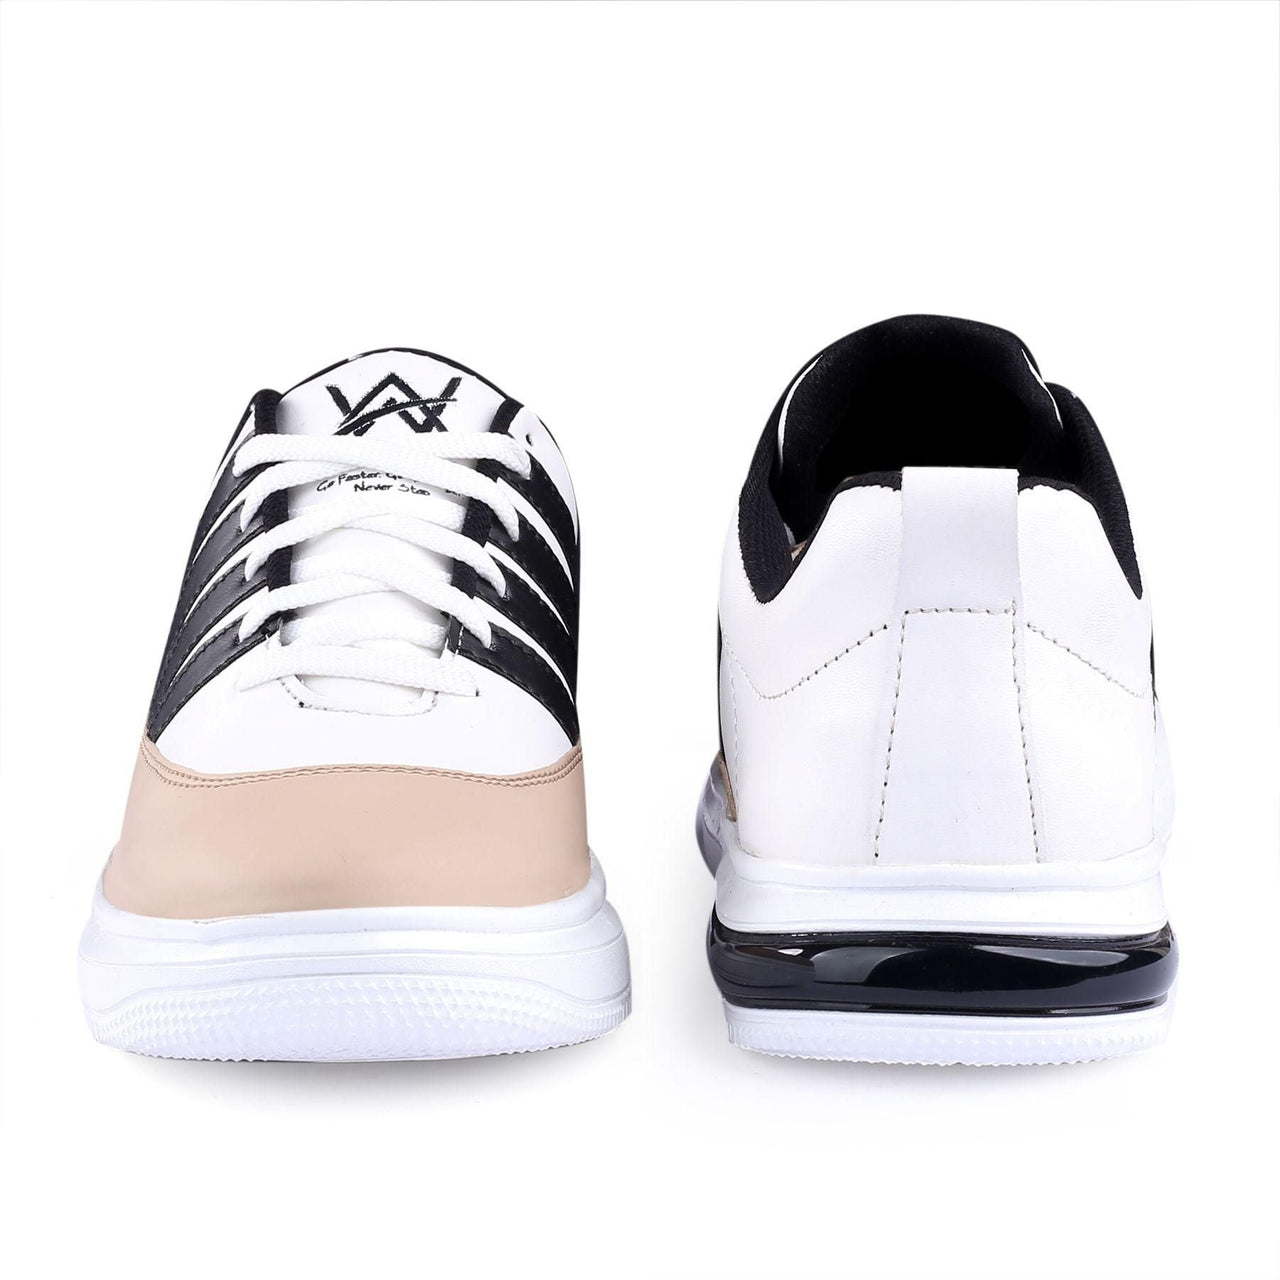 Woakers Men's Casual Sneakers Shoes